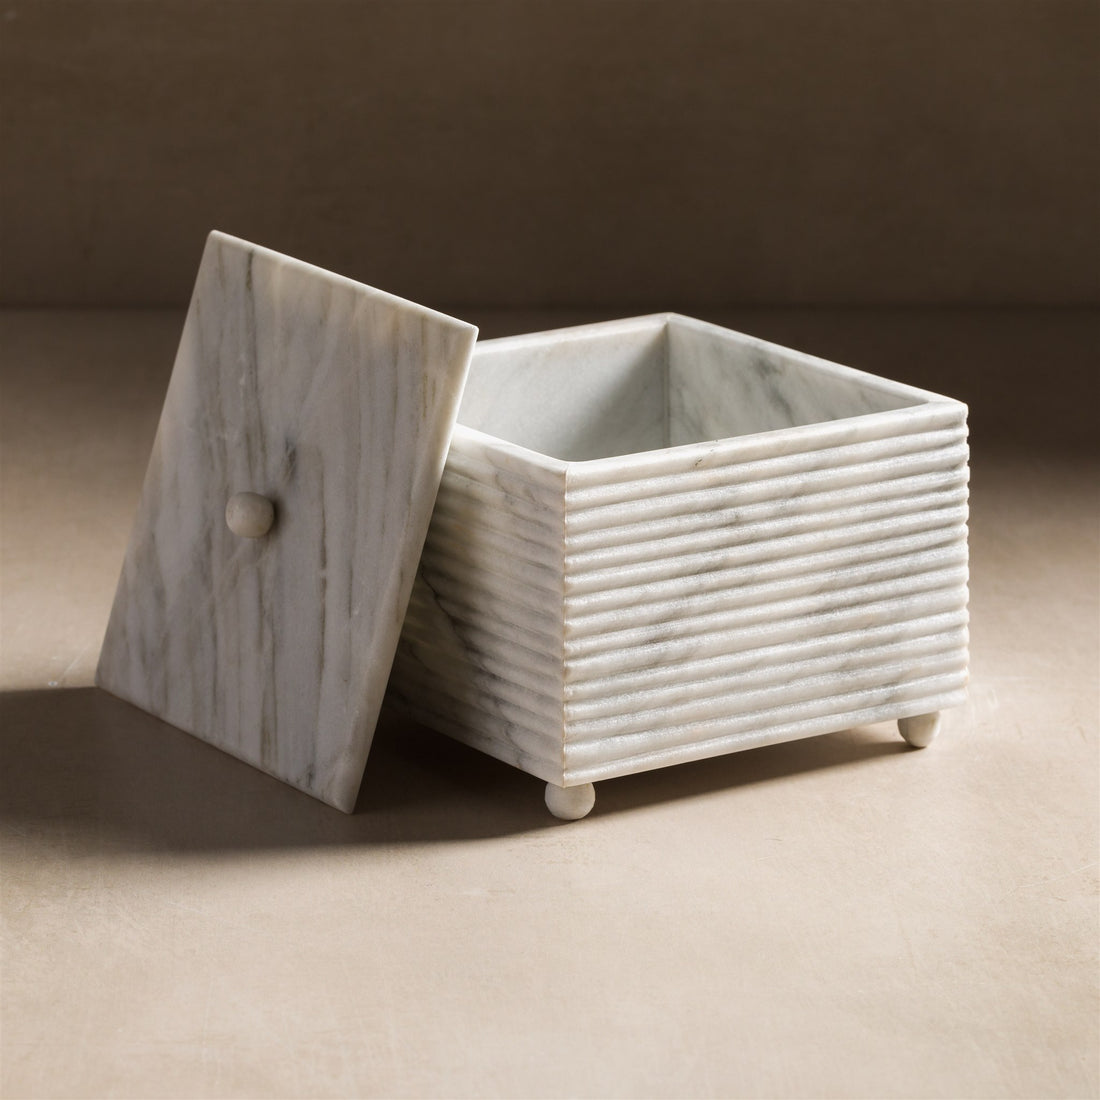 Ribbed square box made of white marble stone and lid.